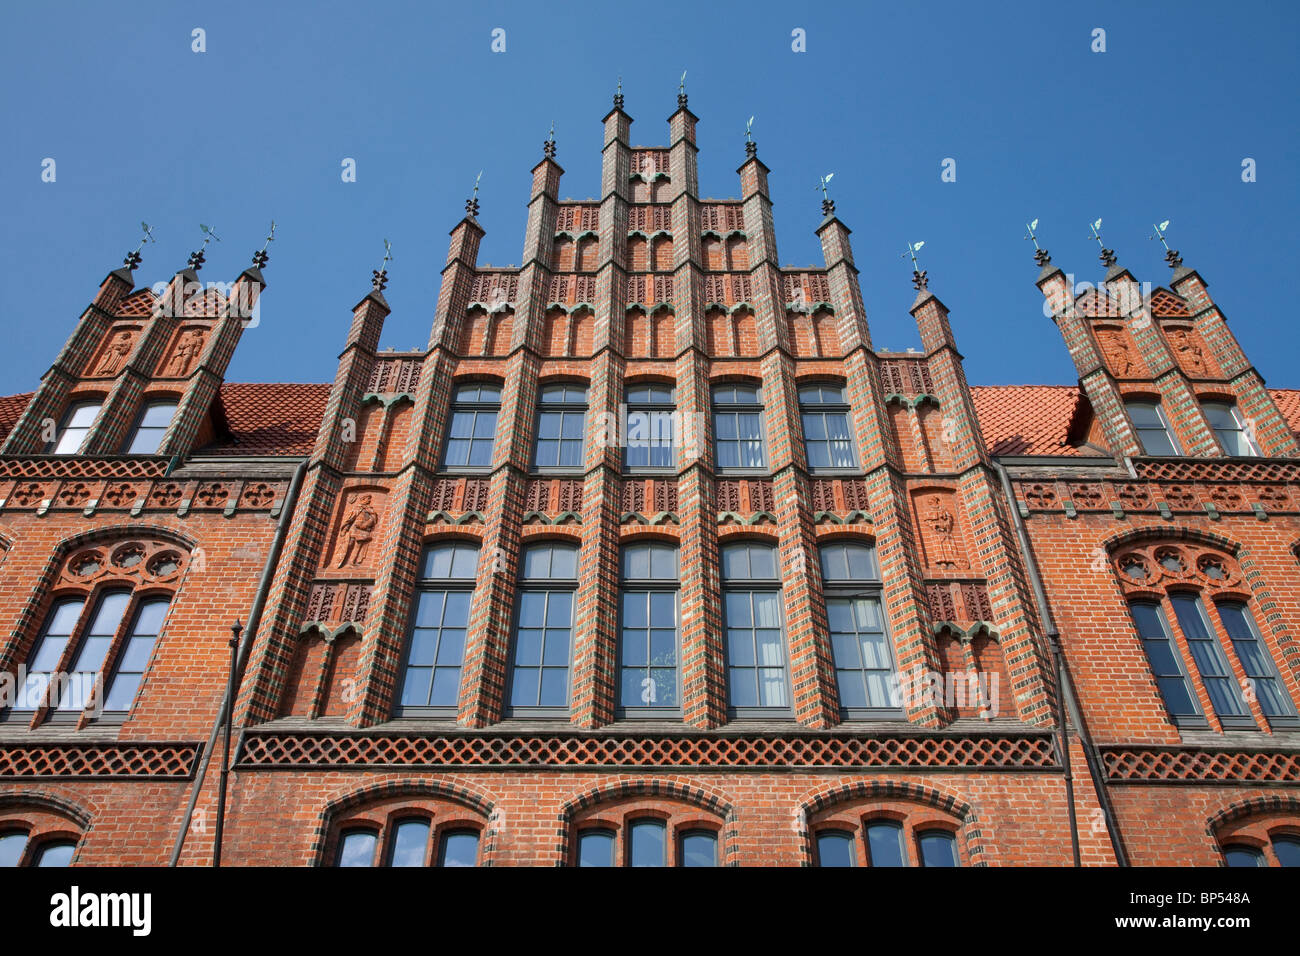 OLD TOWN HALL, HANOVER, LOWER SAXONY, GERMANY Stock Photo